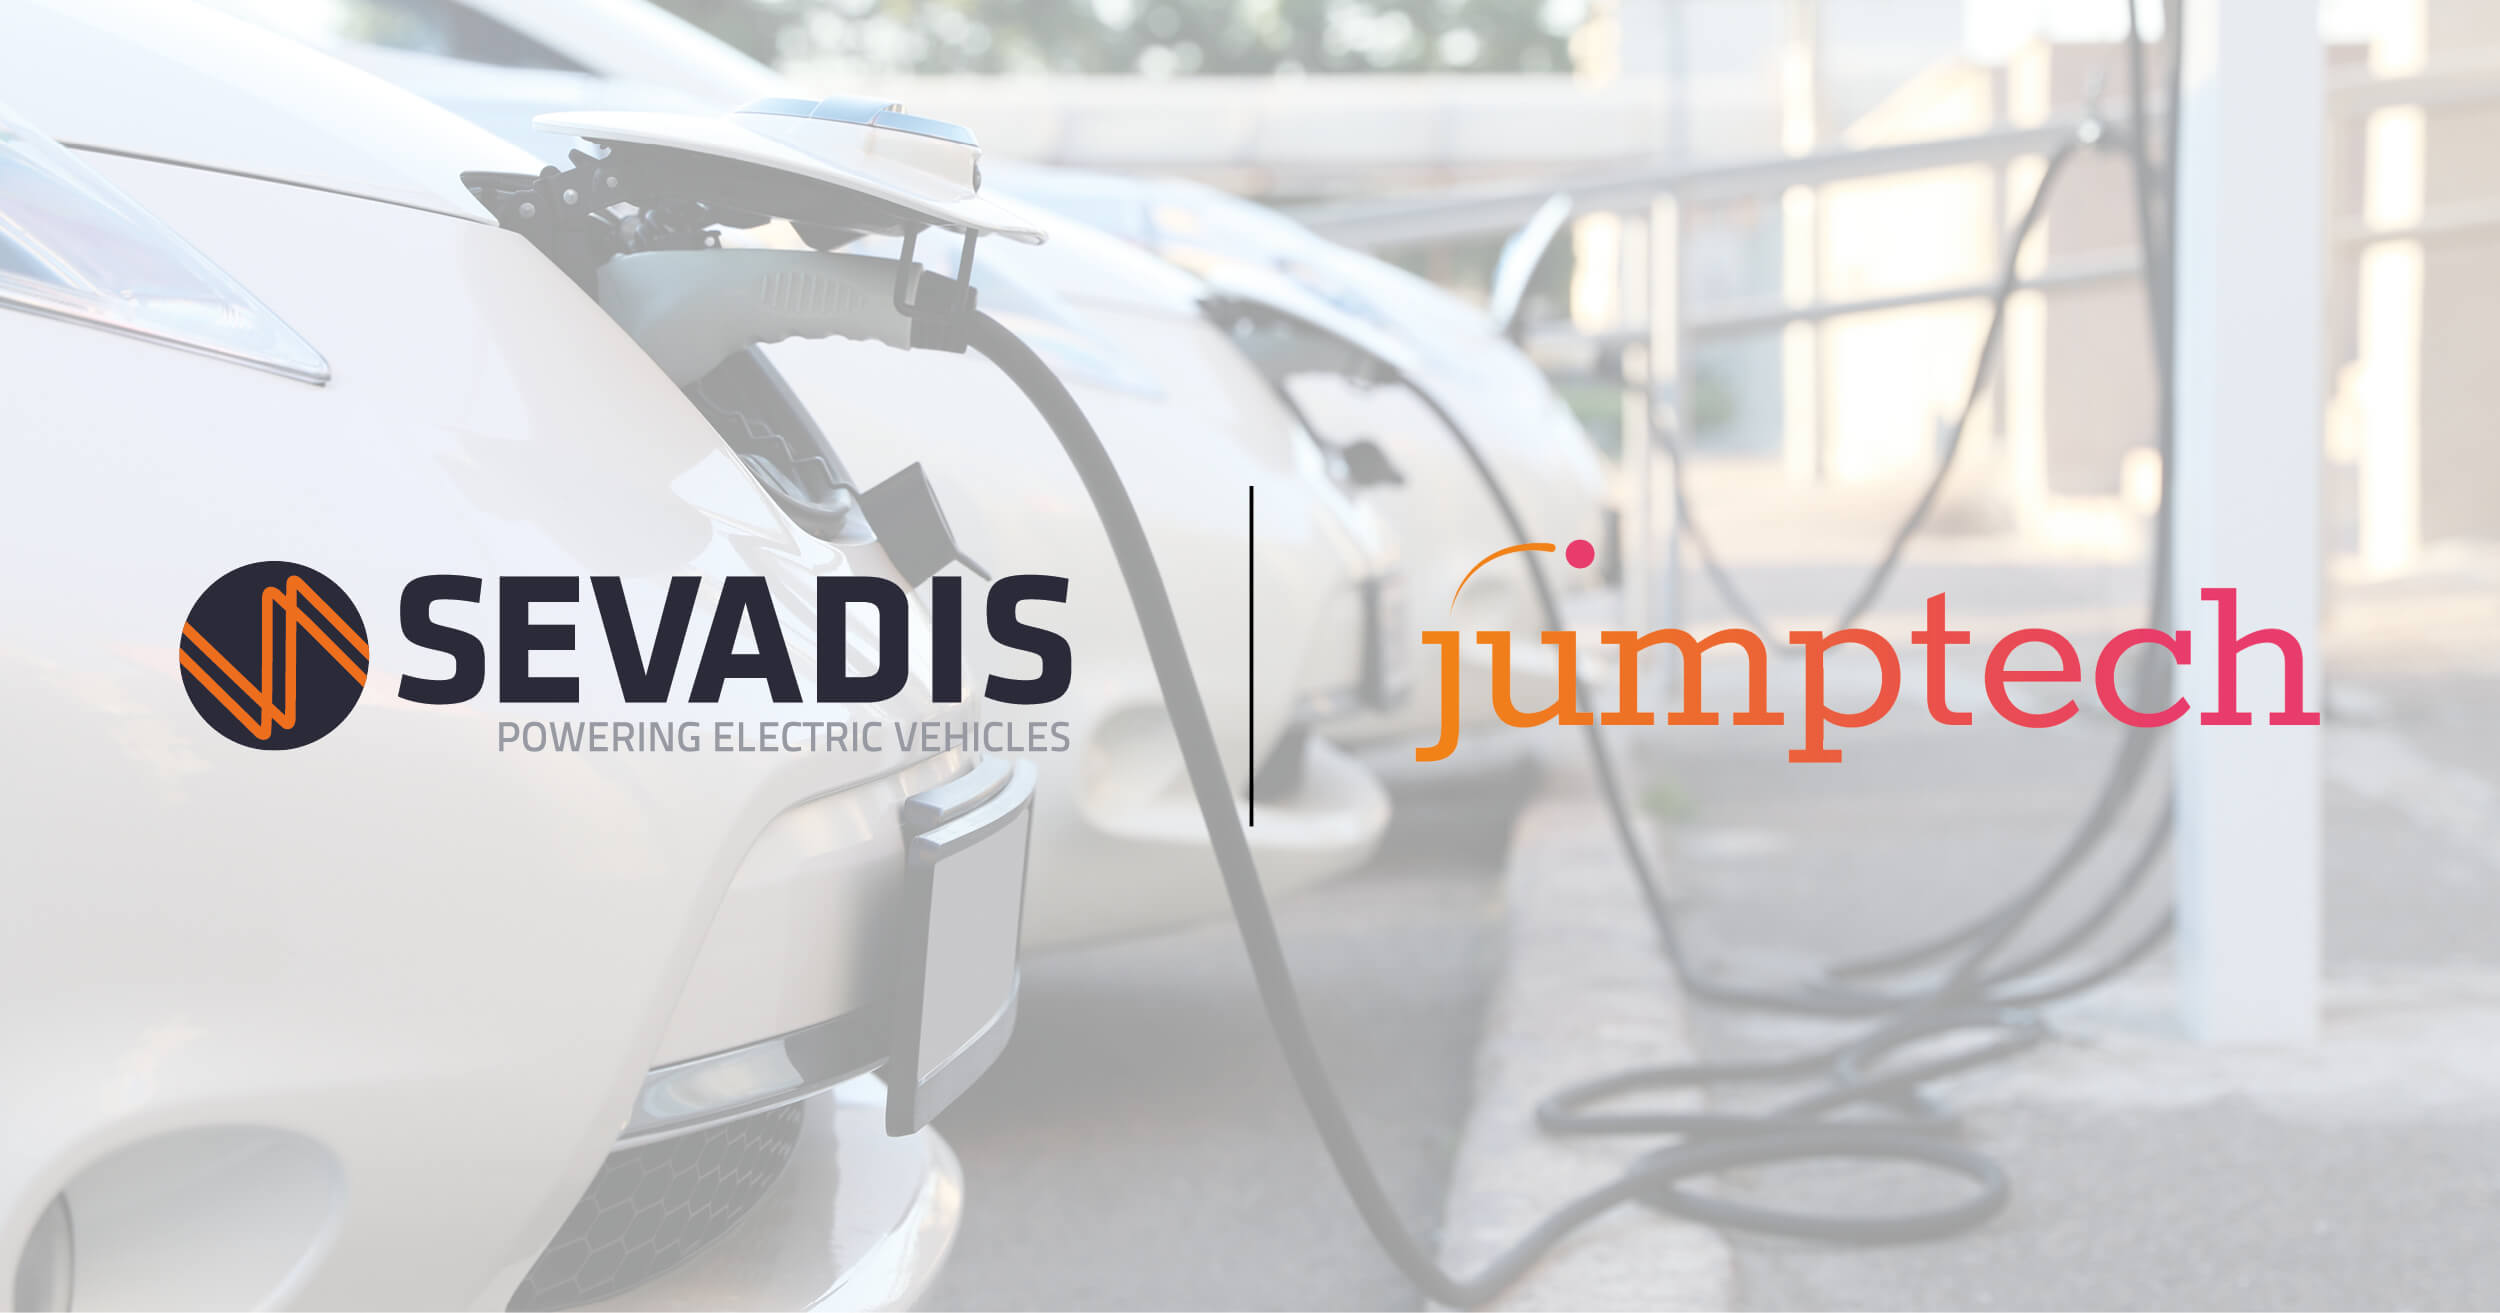 Sevadis and Jumptech join forces to accelerate the roll-out of EV charging points